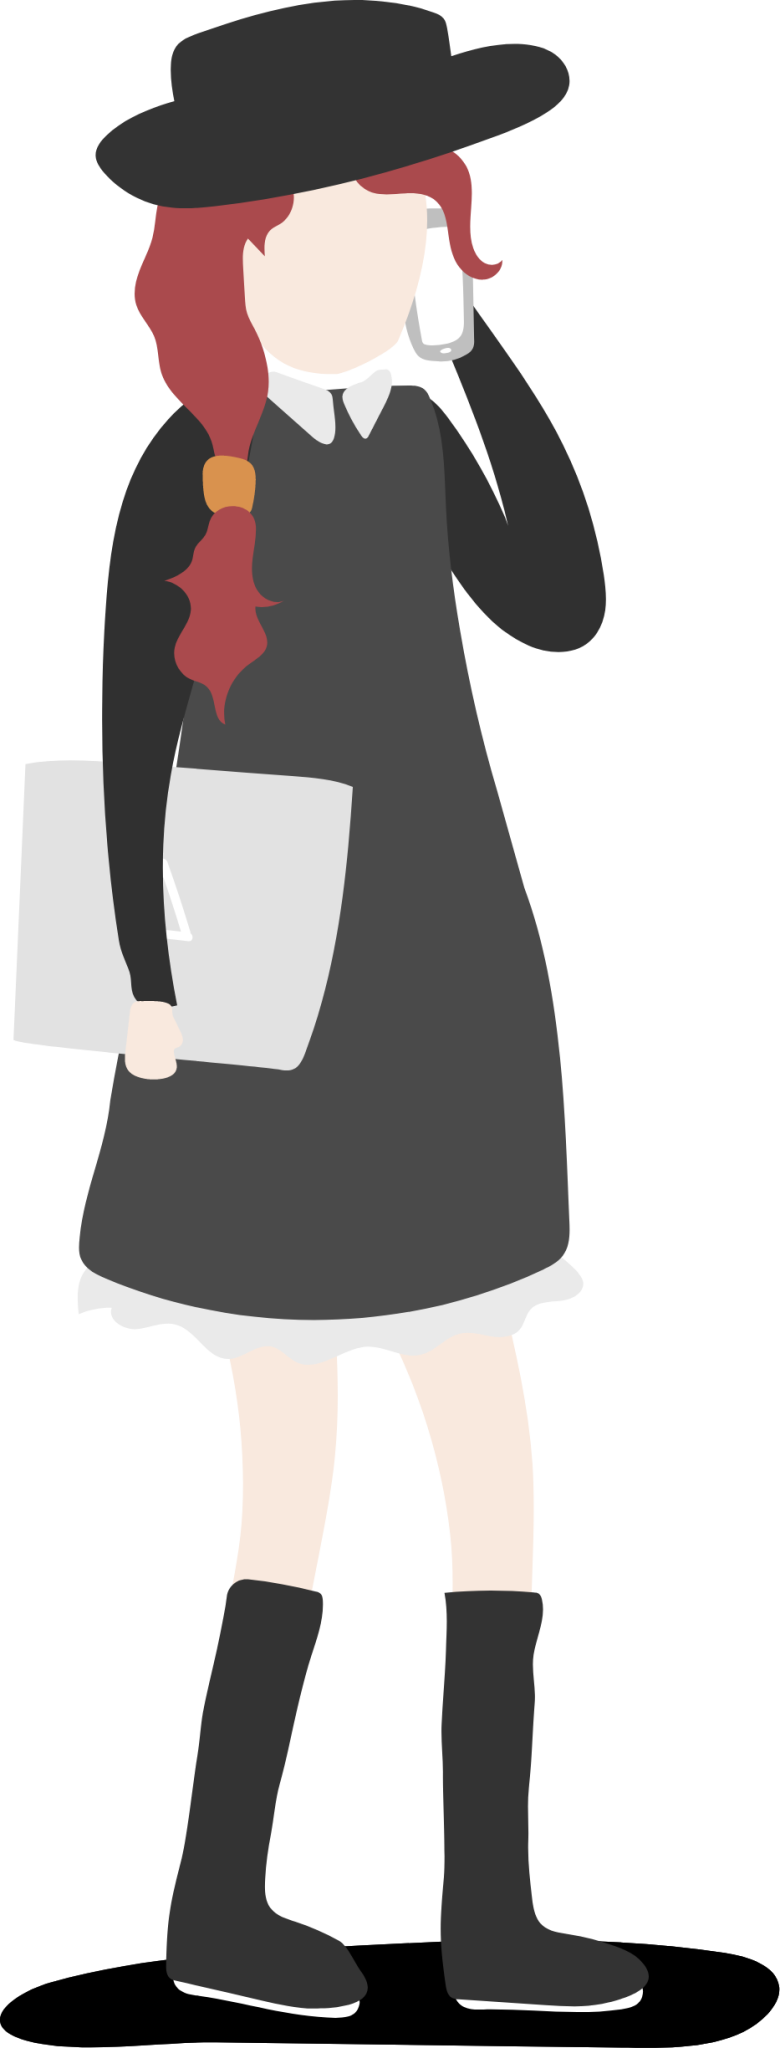 person with hat and skirt dress illustration